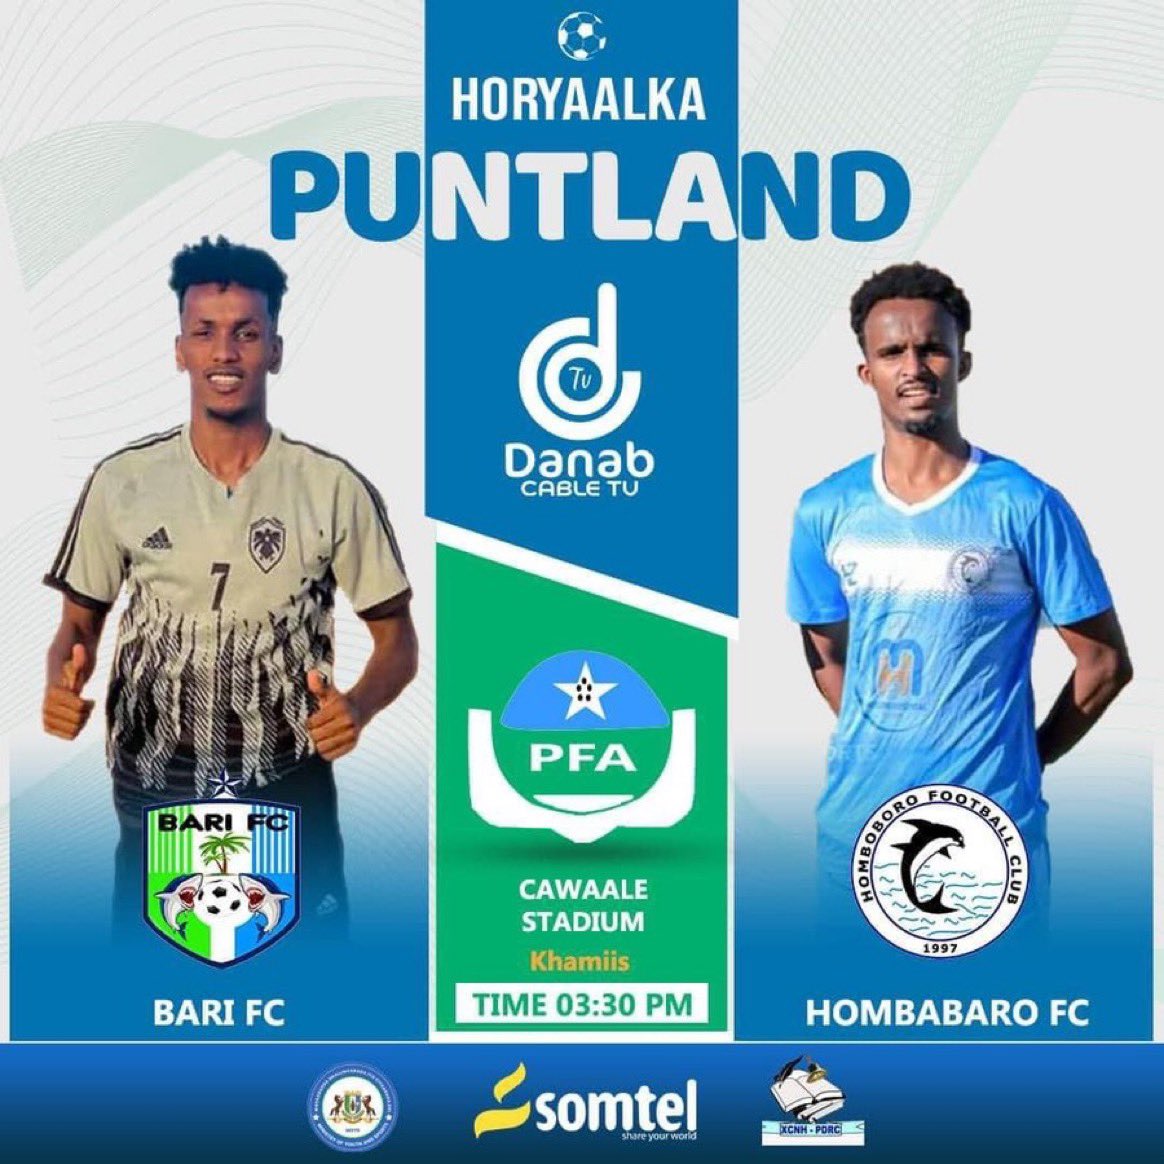 #Galkayo is hosting the #Puntland Seria A Teams League today. Hombabaro FC takes on Bari FC in what marks a significant step forward for Puntland sports.

#PuntlandFirst is a major proponent for a proper sports sector in Puntland. 

Good Luck lads